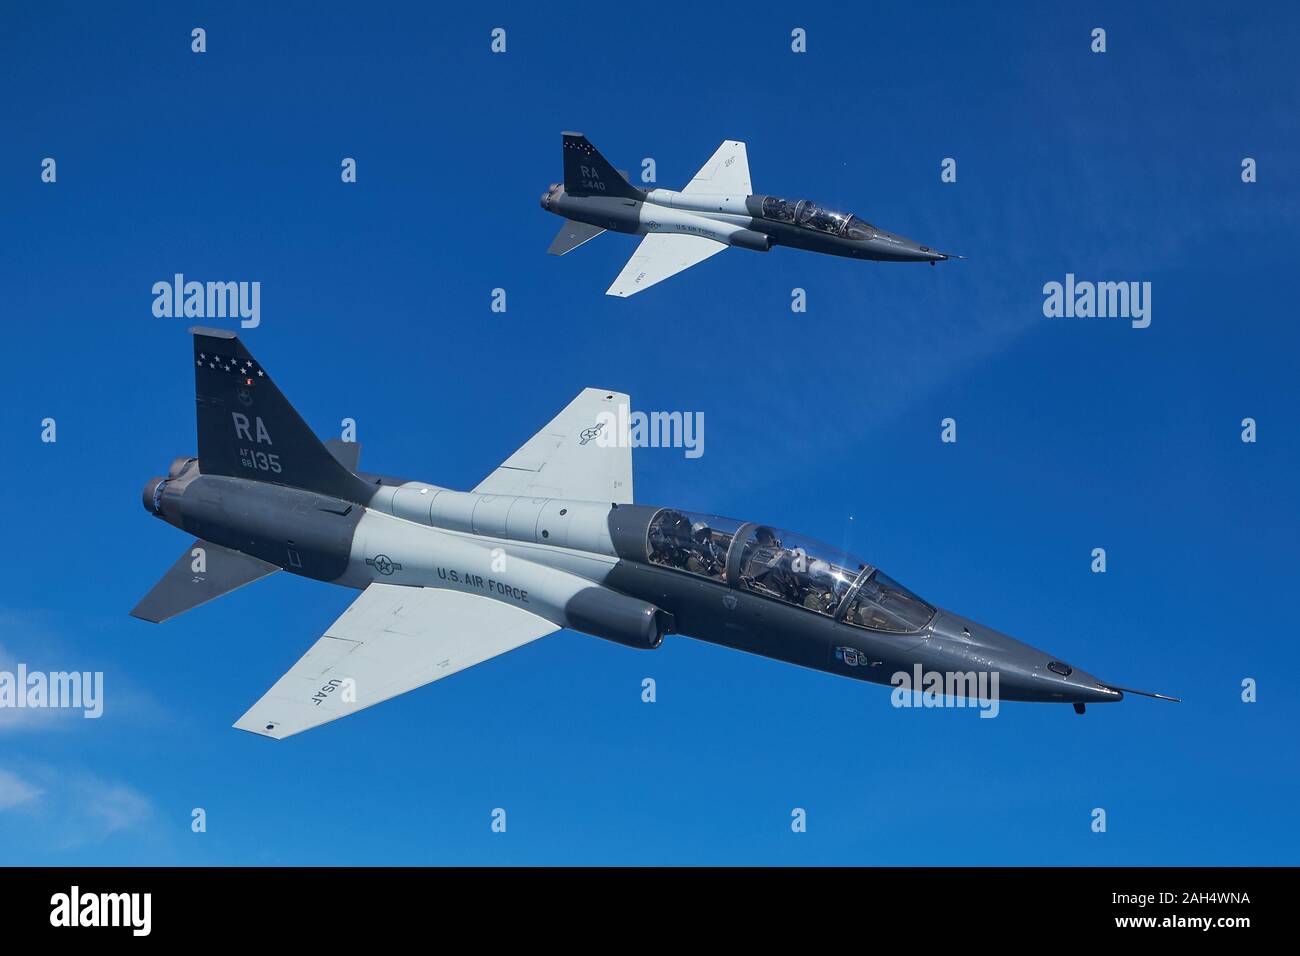 U.S. Air Force T-38C Talons assigned to the 560th Flying Training Squadron, Joint Base San Antonio-Randolph, rejoin a 4-ship formation during instructor pilot training over a military operations area in Southern Texas, Dec. 19, 2019. The flight focused on 4-ship maneuvers and proficiency for instructor pilots completing syllabus training. The 560 FTS qualifies pilots from various airframes as instructor pilots in the T-38 aircraft.  (U.S. Air Force photo by MSgt Christopher Boitz) Stock Photo